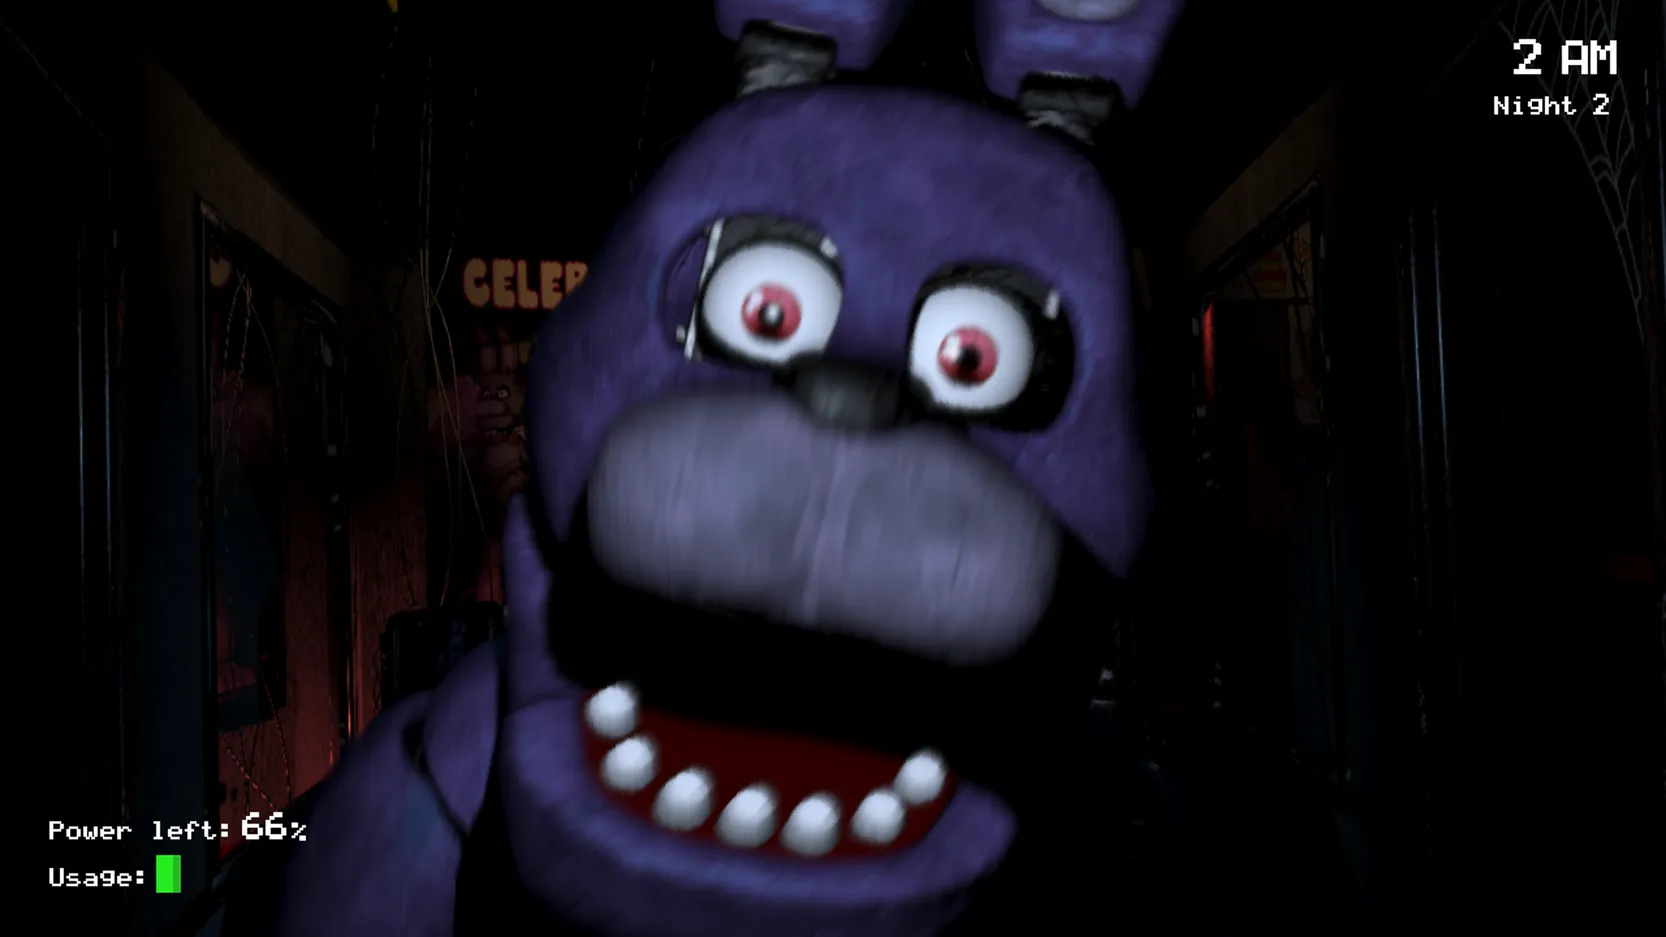 Five Nights at Freddy's Apk 2.0.3 Download Latest Version